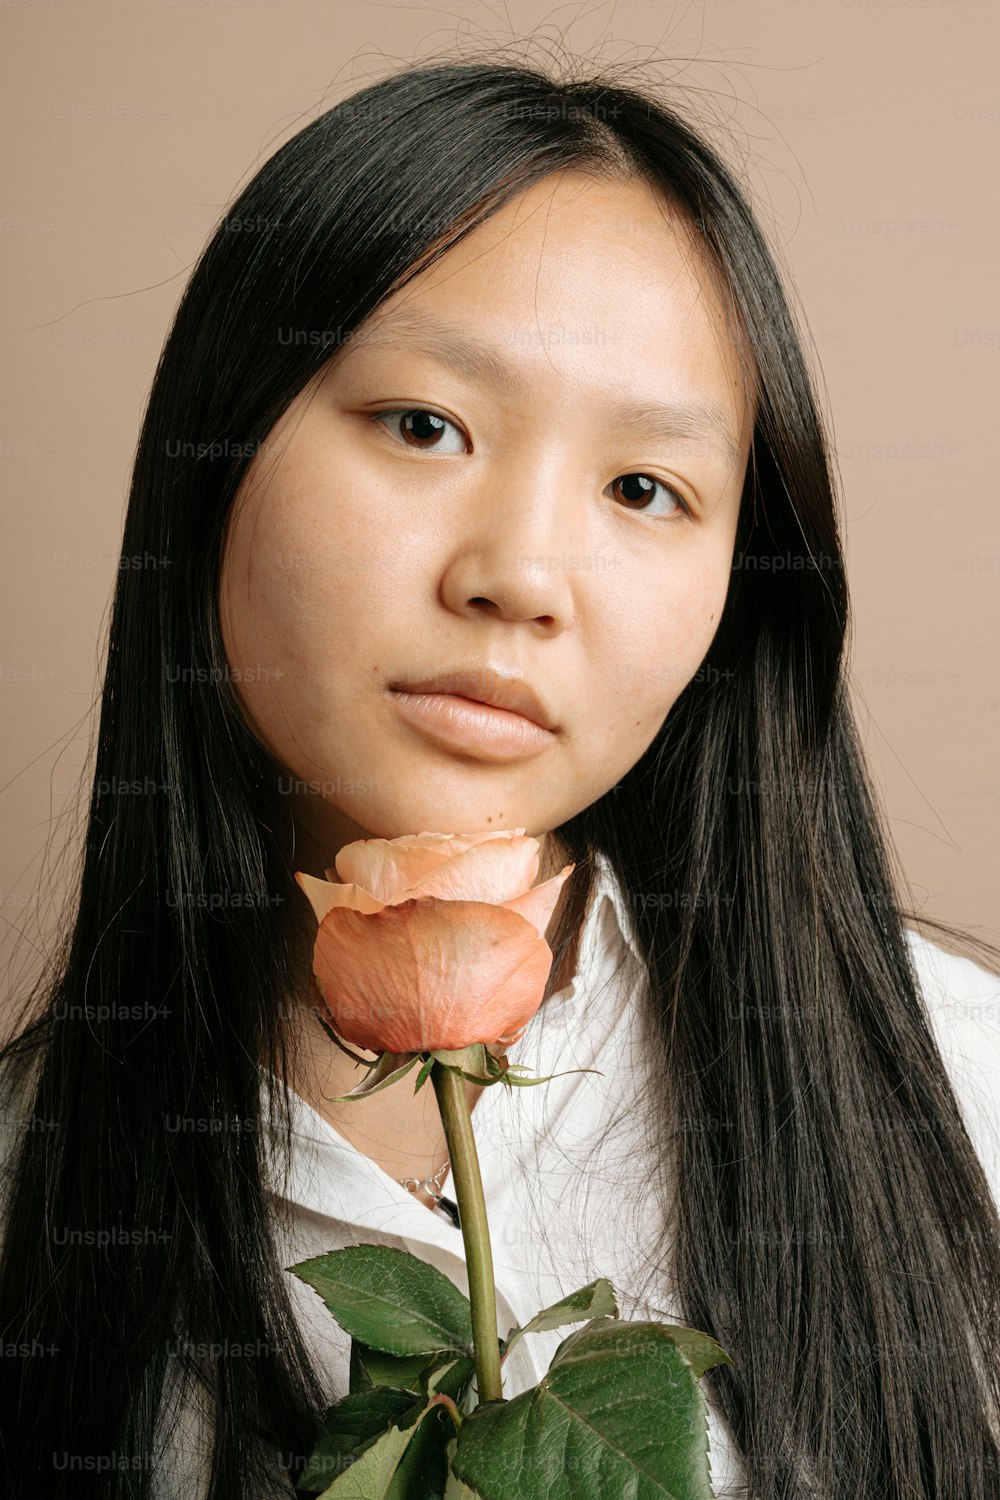 a woman with long black hair holding a rose